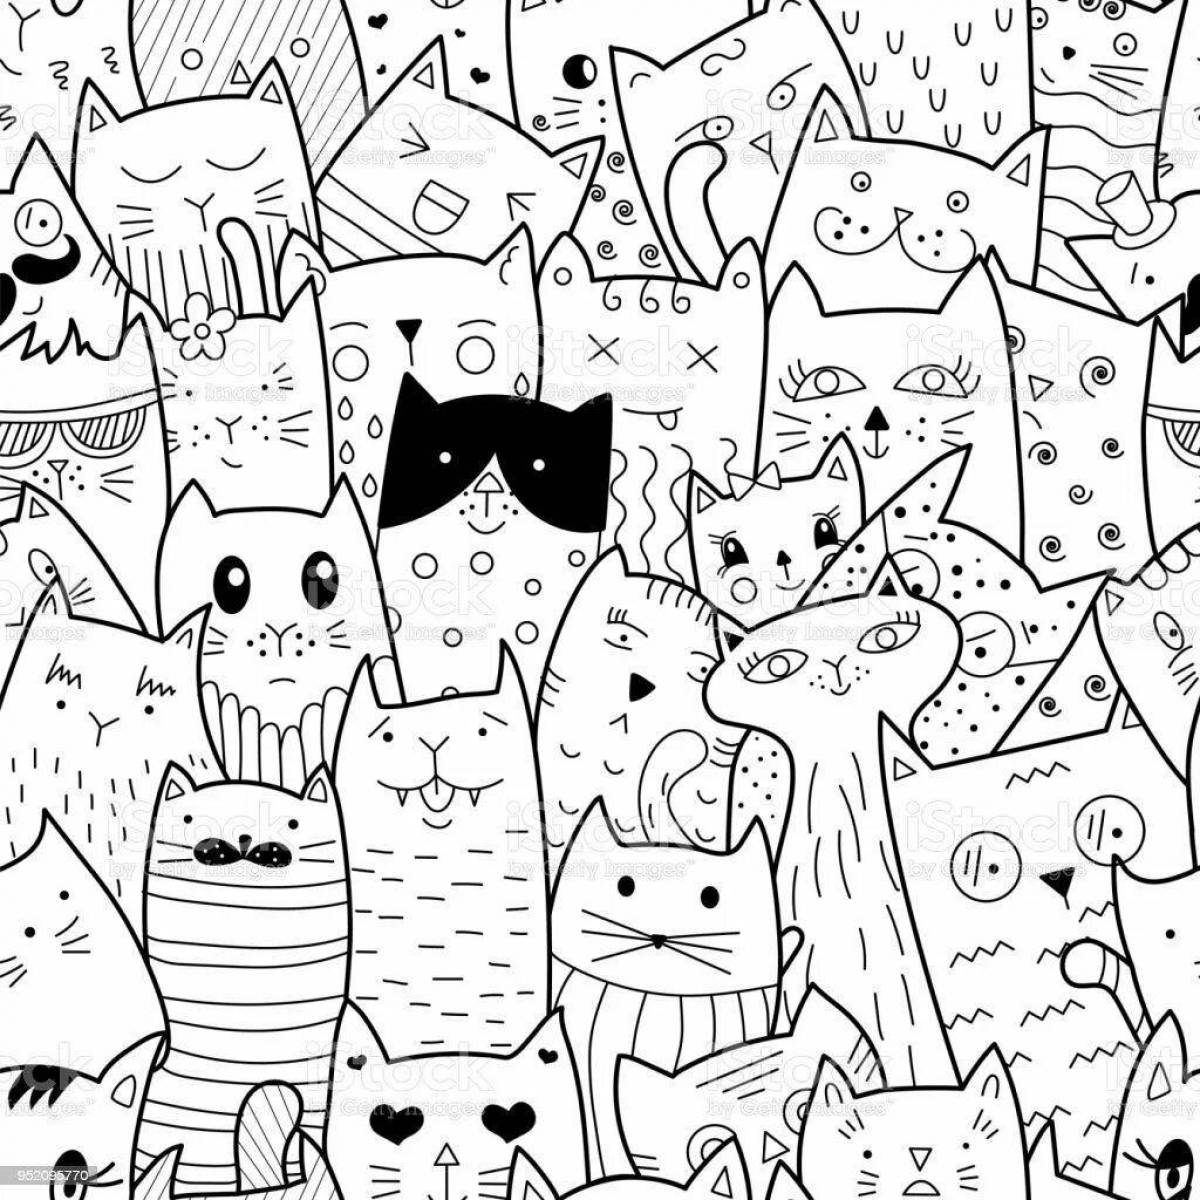 Playful many cats coloring page